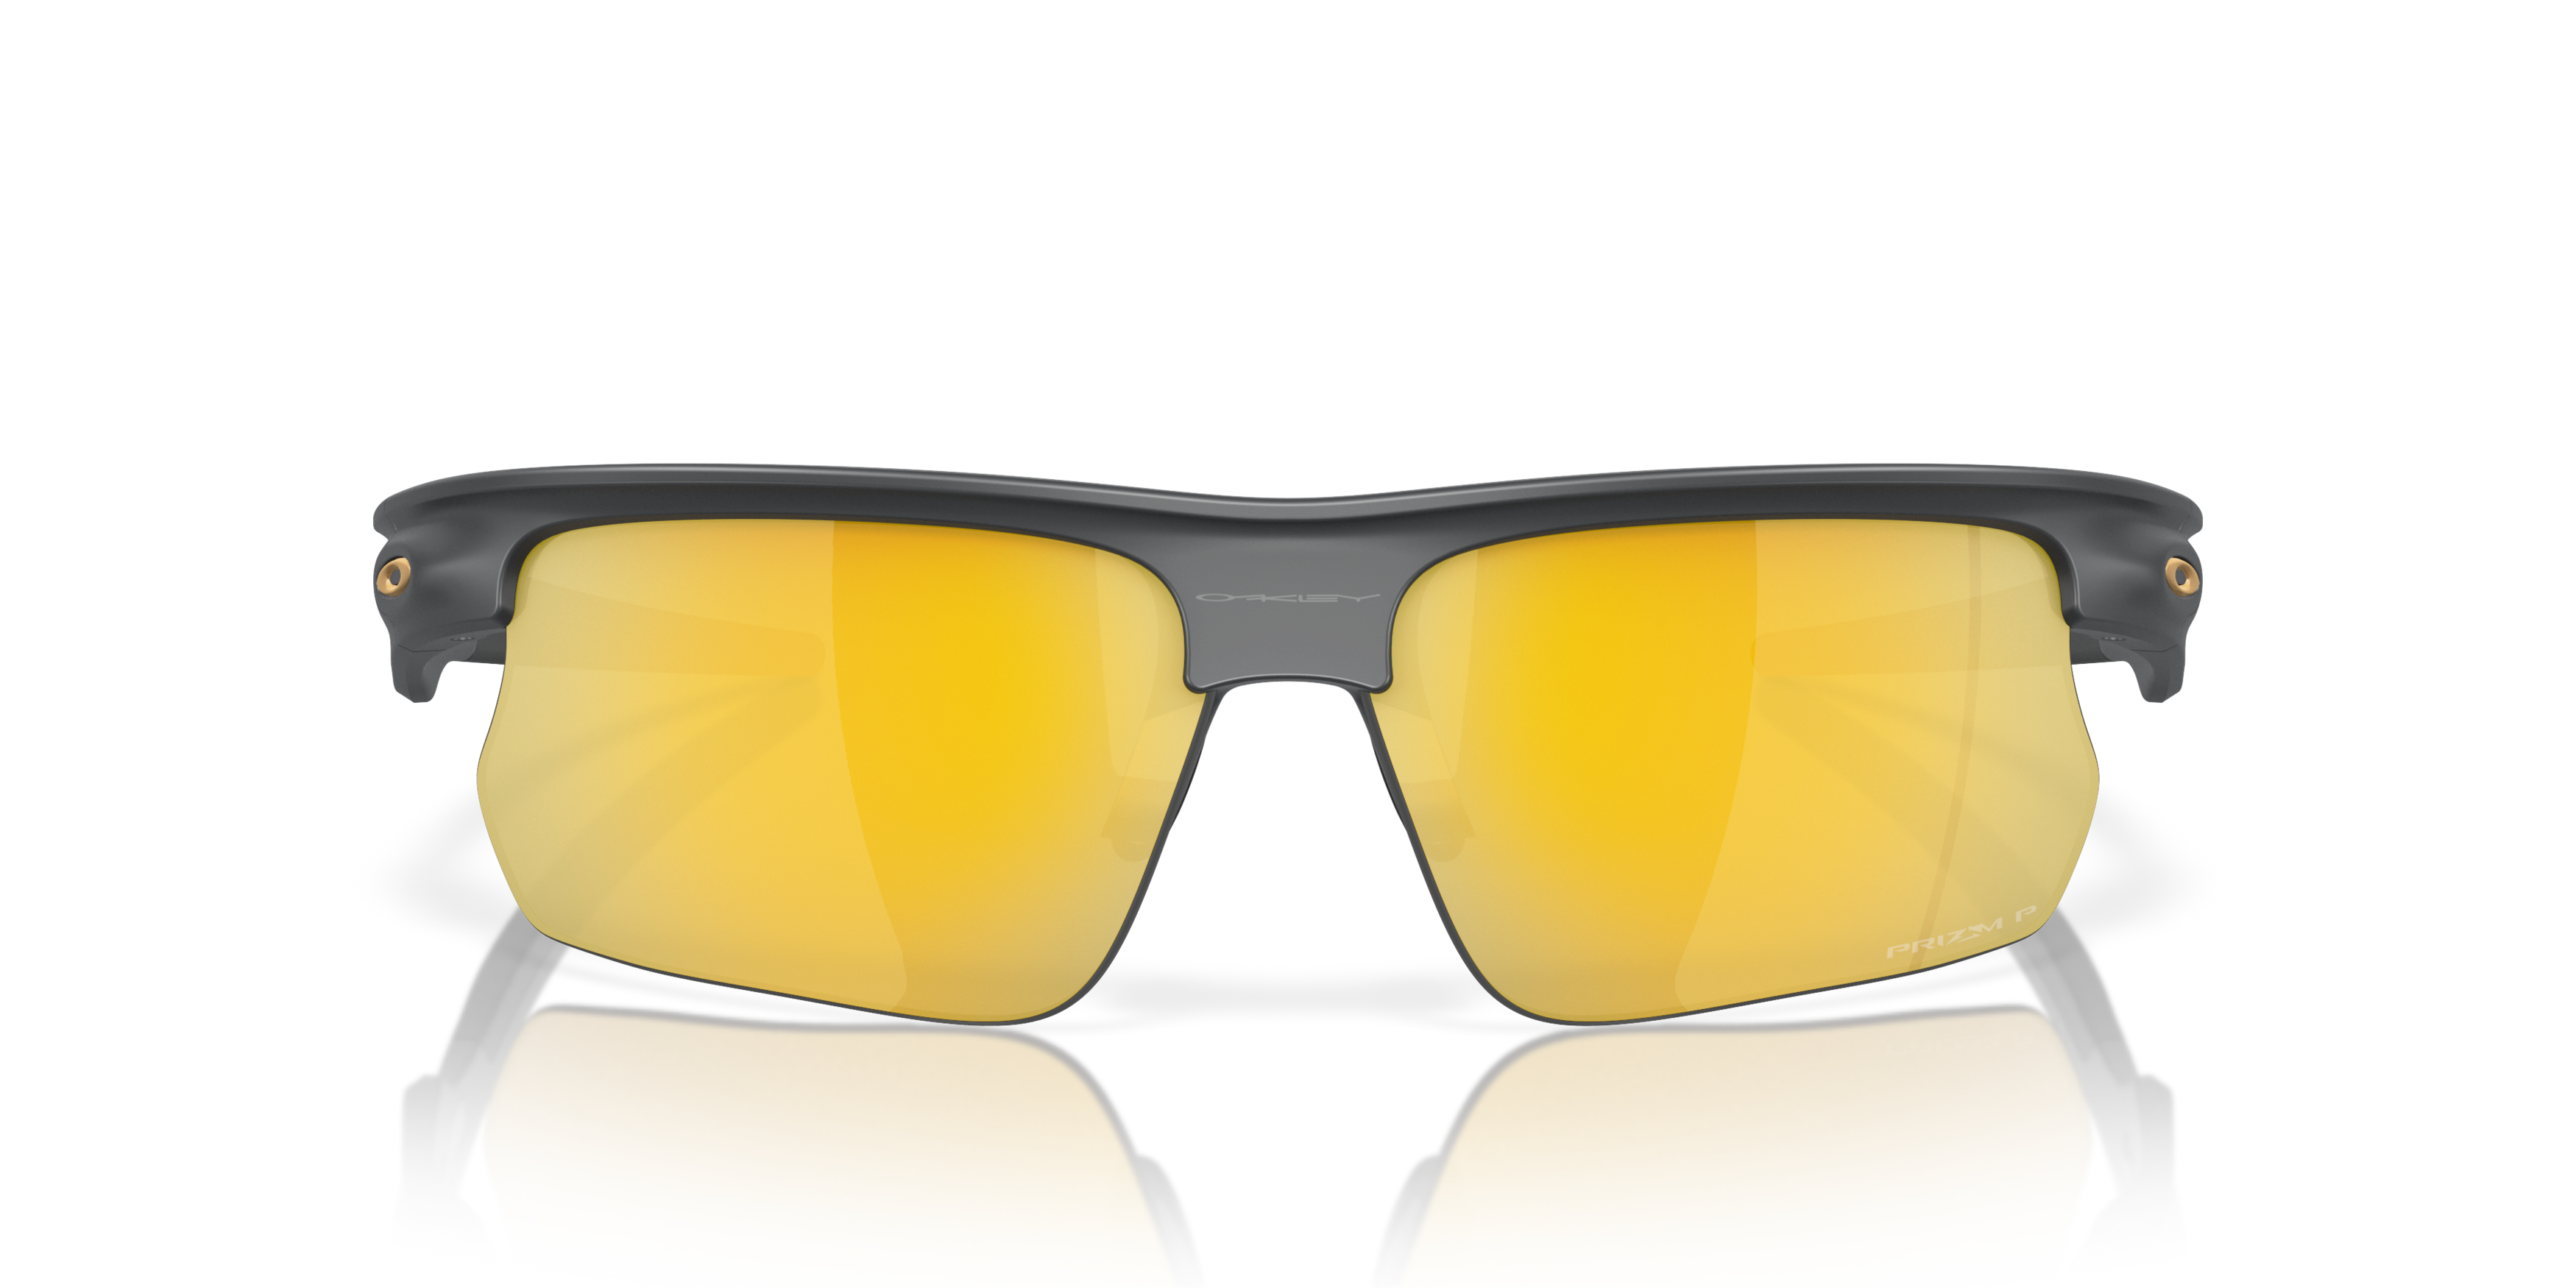 [products.image.front] Oakley BiSphaera OO 9400 Sunglasses